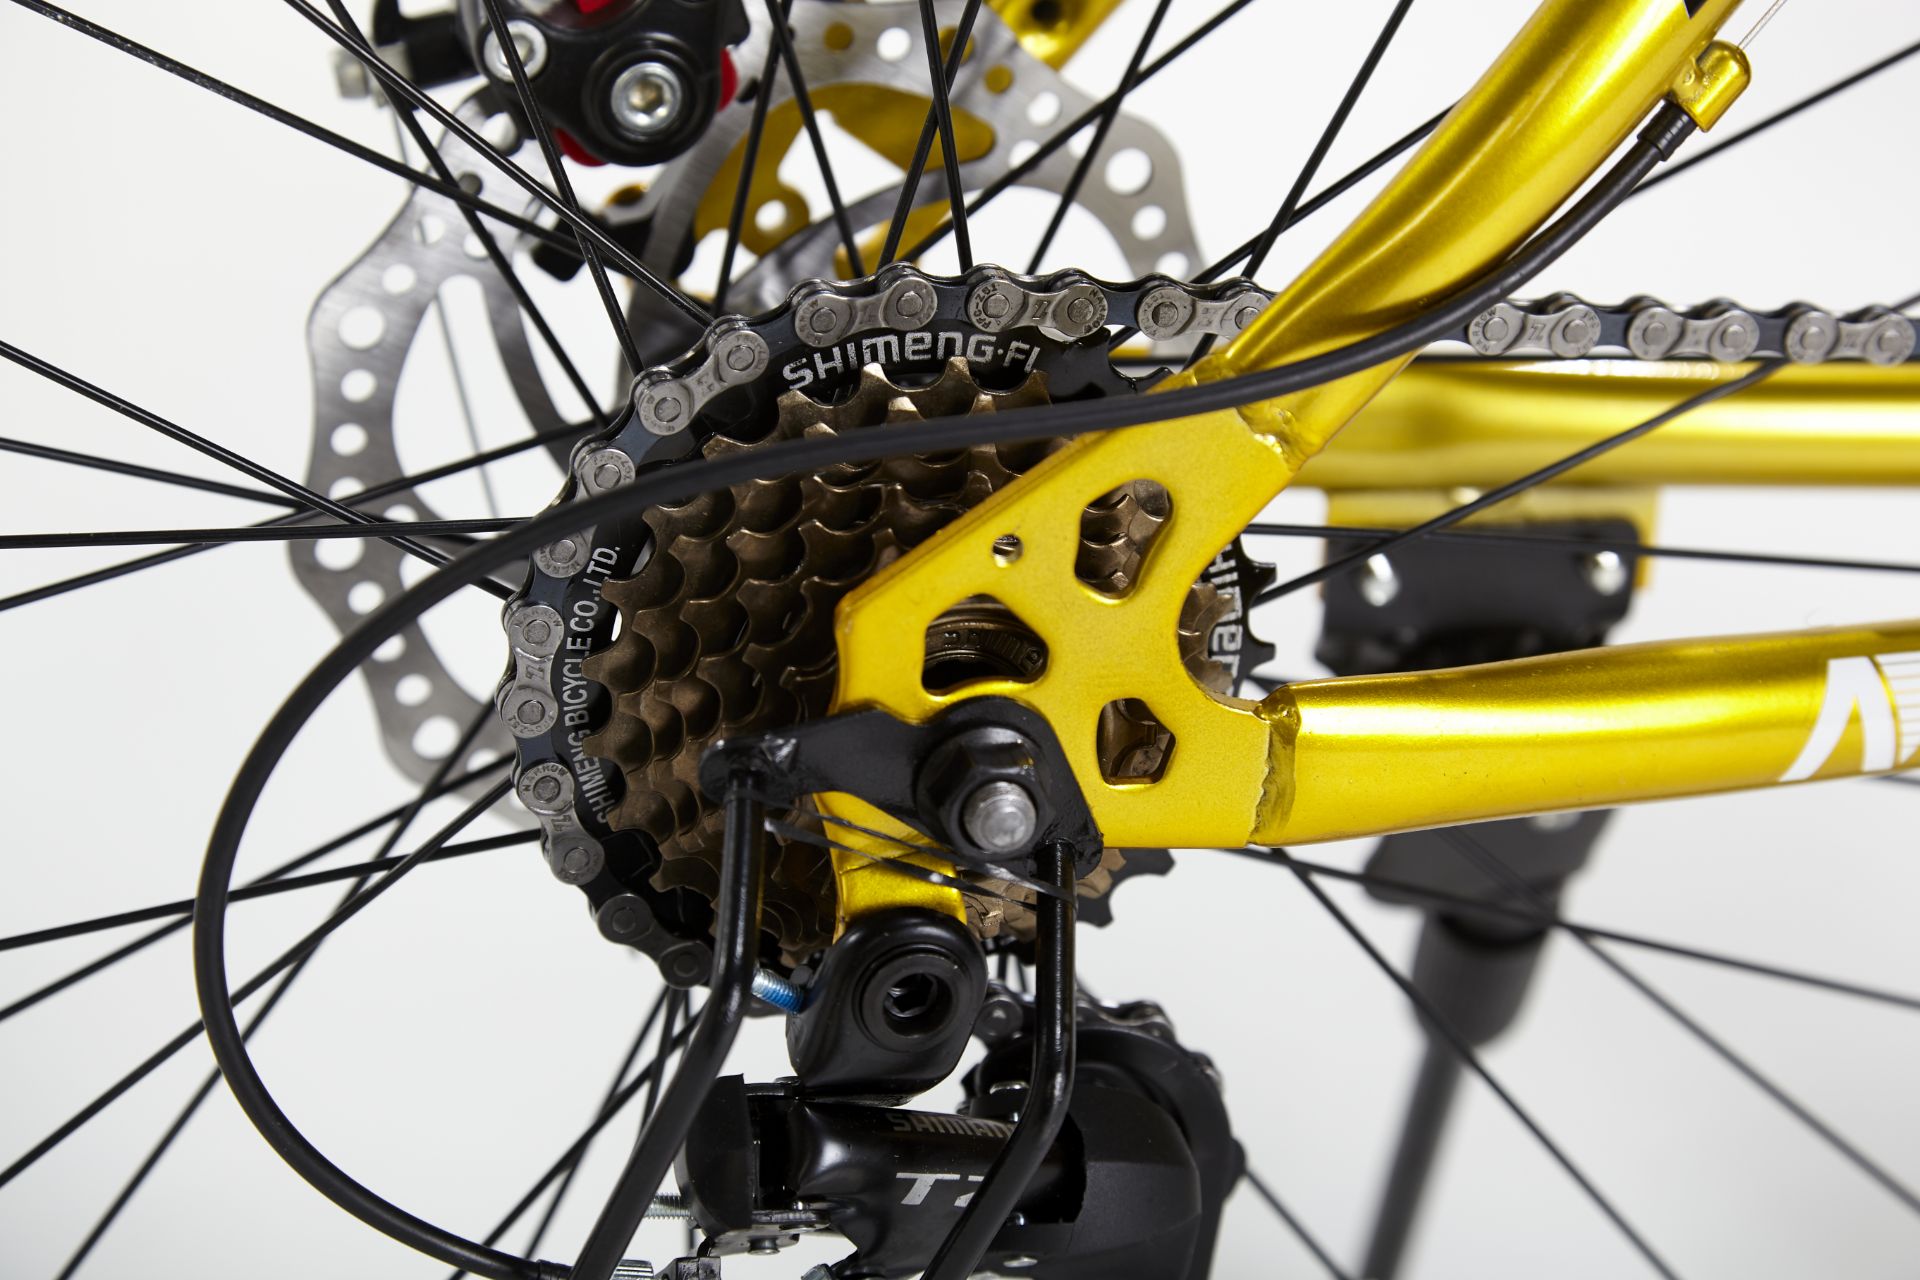 BRAND NEW NEW SPEED 21 GEARS STUNNING SUSPENSION GOLD COLOURED MOUNTAIN BIKE - Image 11 of 11